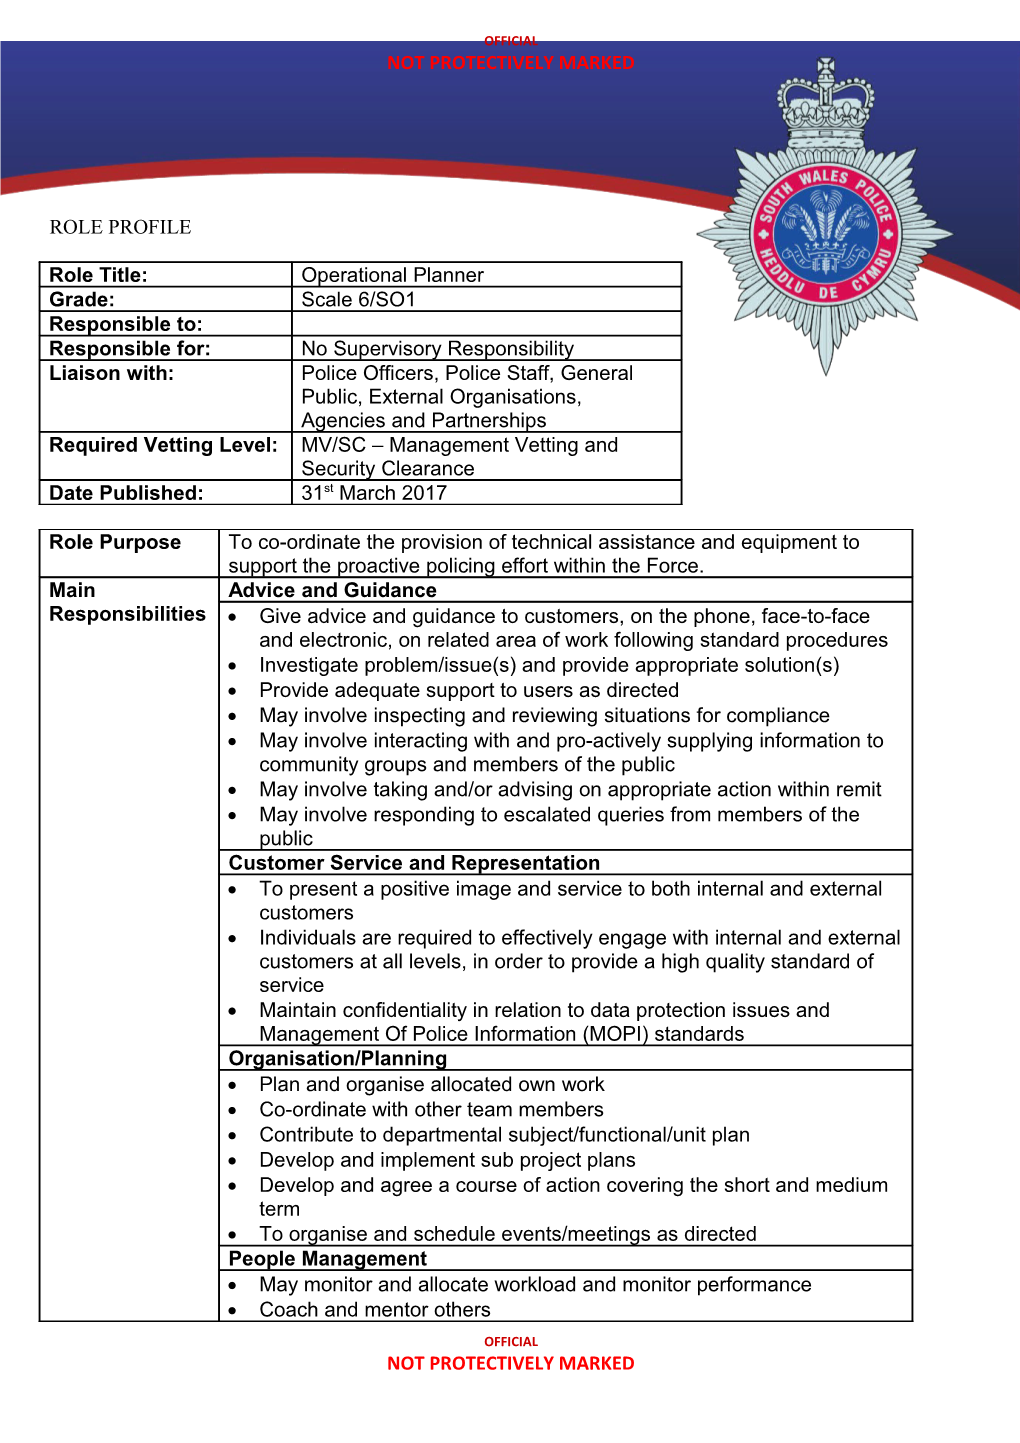 South Wales Police Role Profile